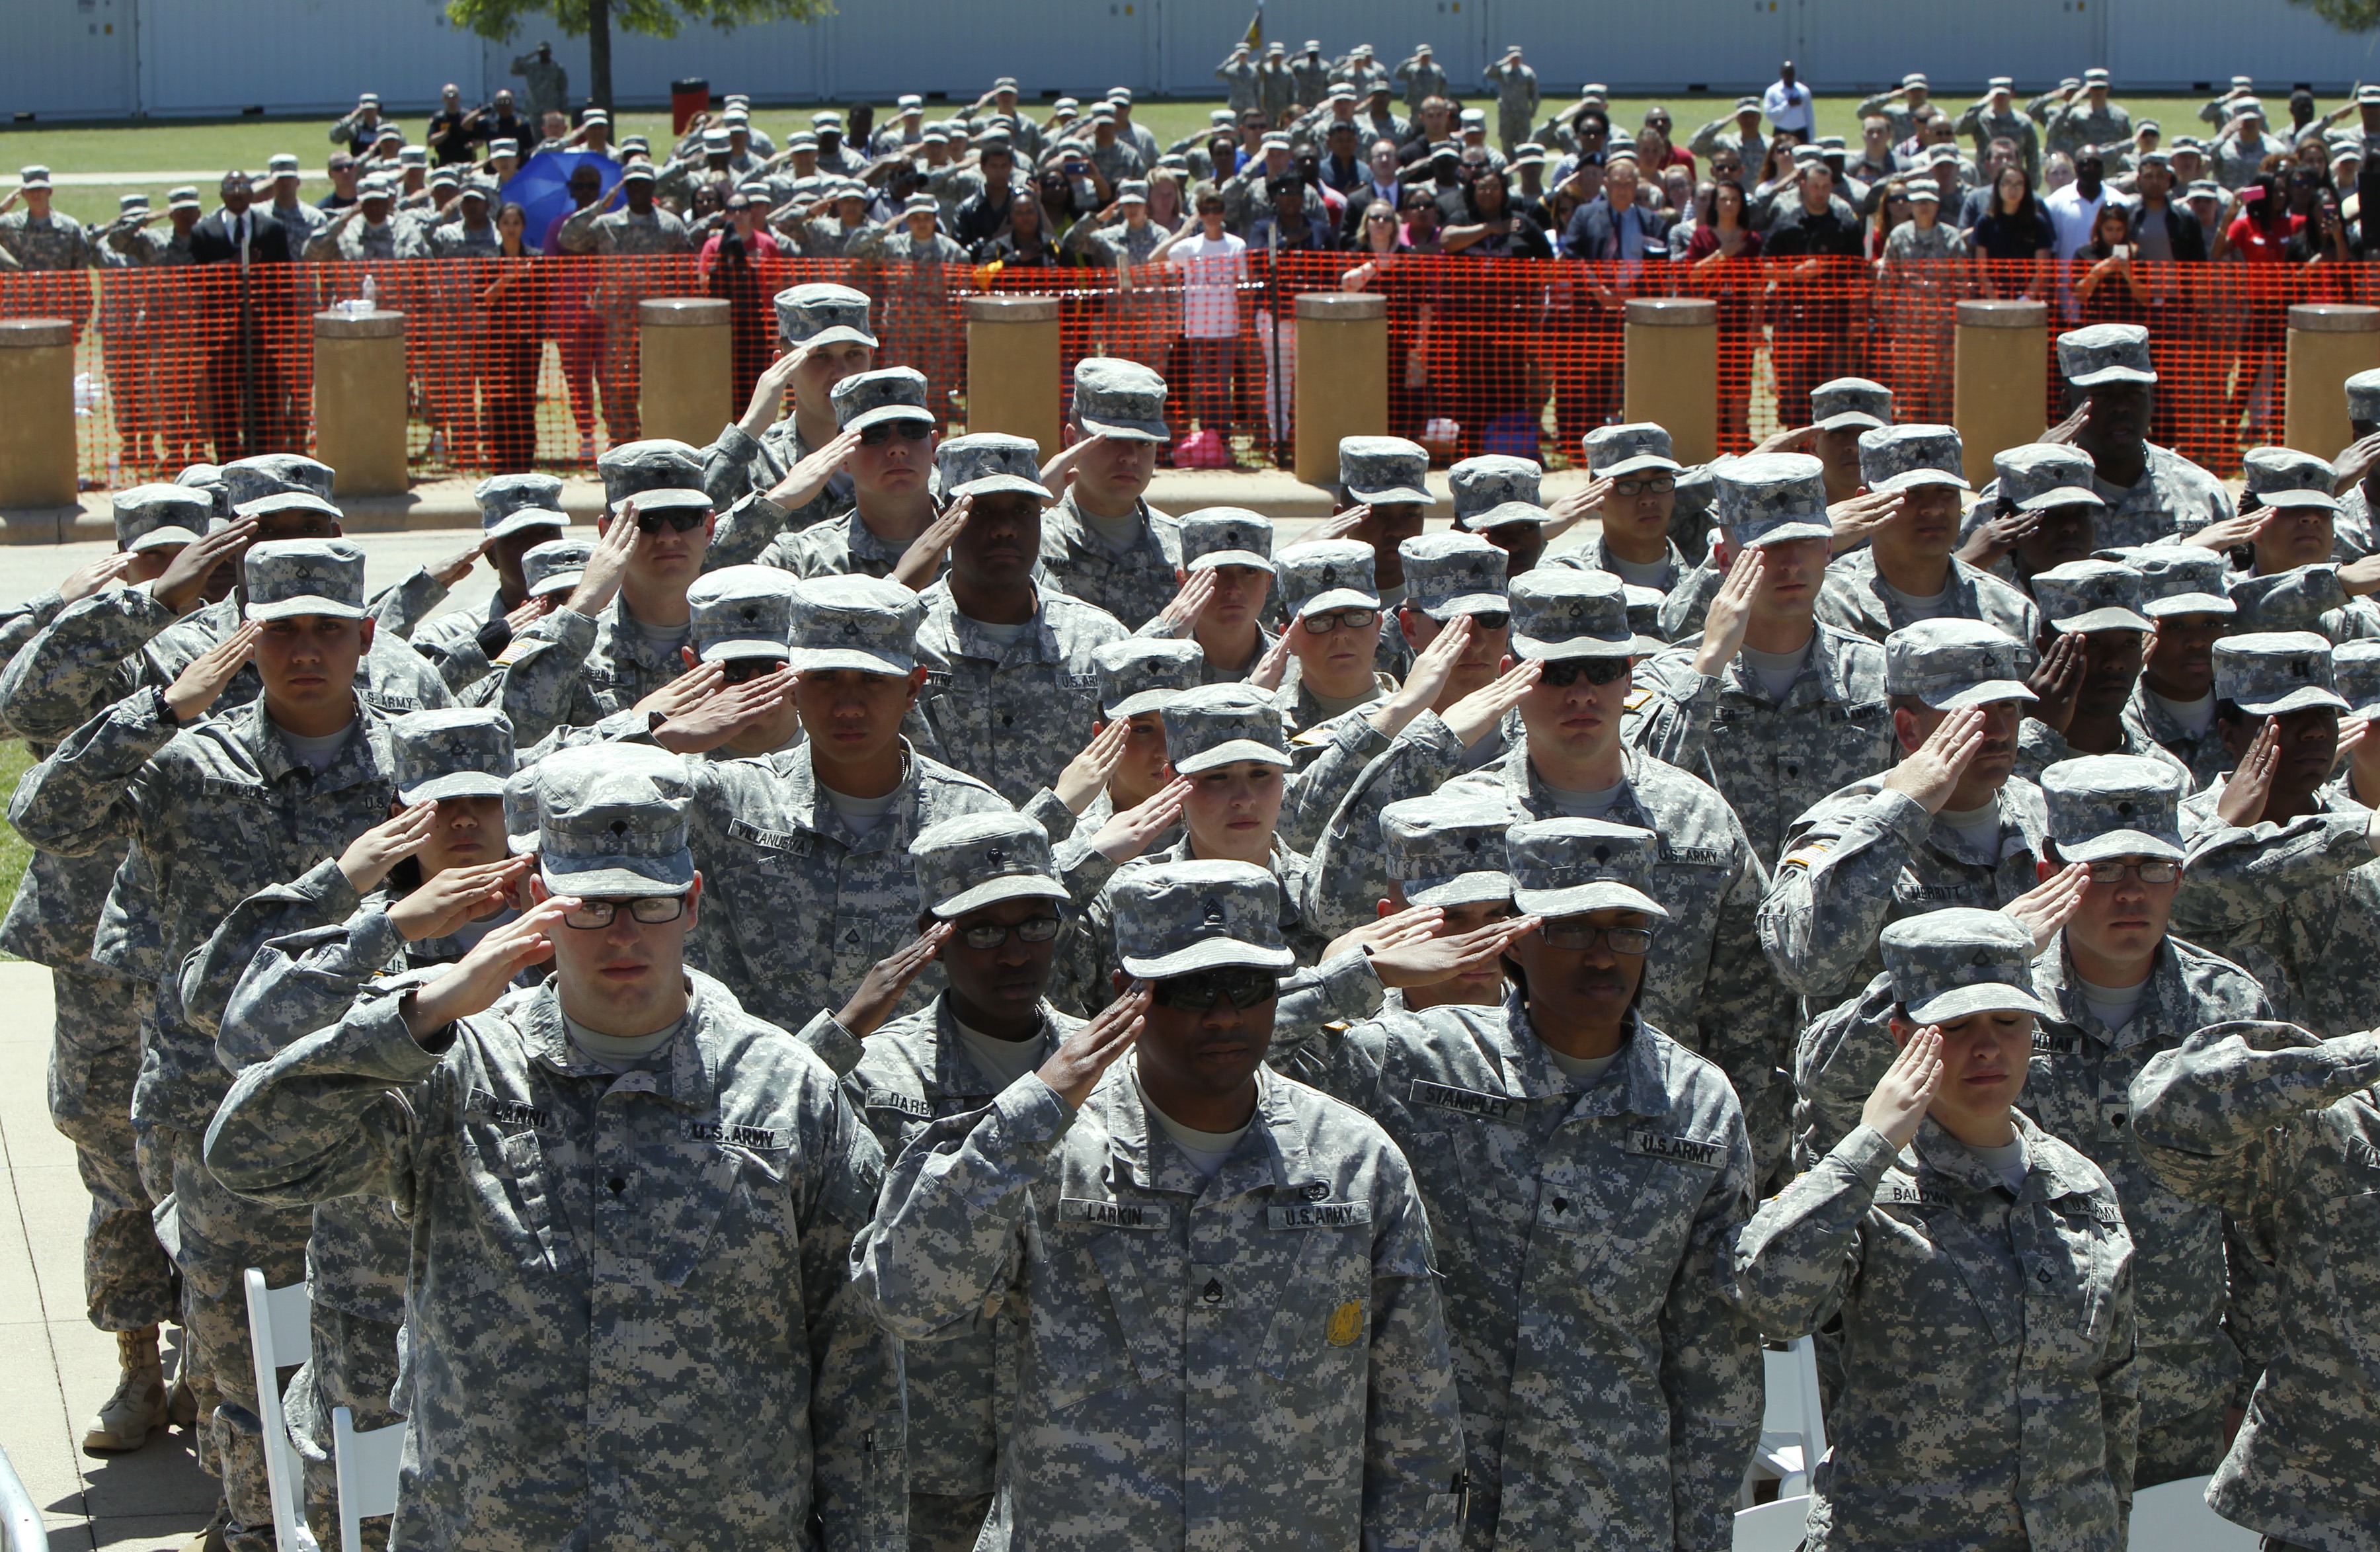 U.S. Army soldiers salute during the national anthem at Fort Hood military base in Killen, Texas on April 9, 2014. (Erich Schlegel—Getty Images)